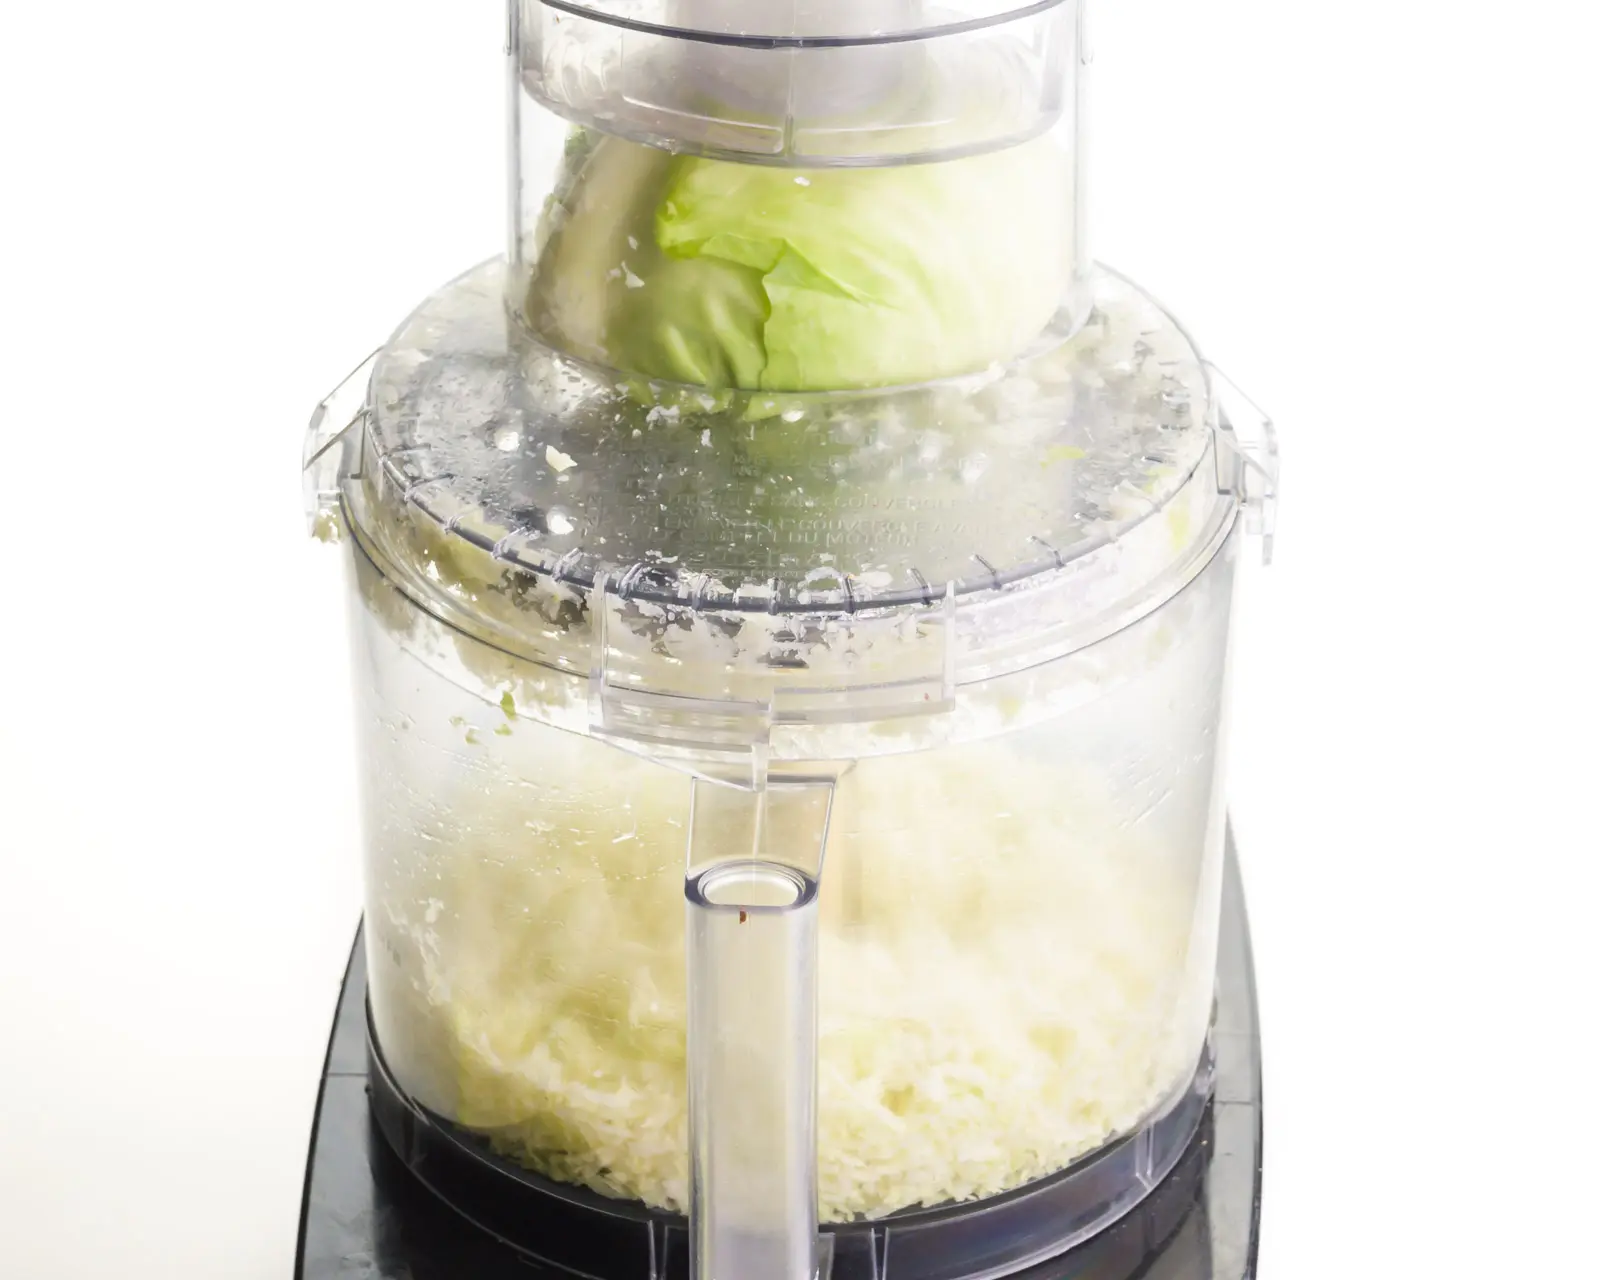 Cabbage is in the top of a food processor, using the shredding blade to shred it. There is shredded cabbage in the main bowl of the food processor.